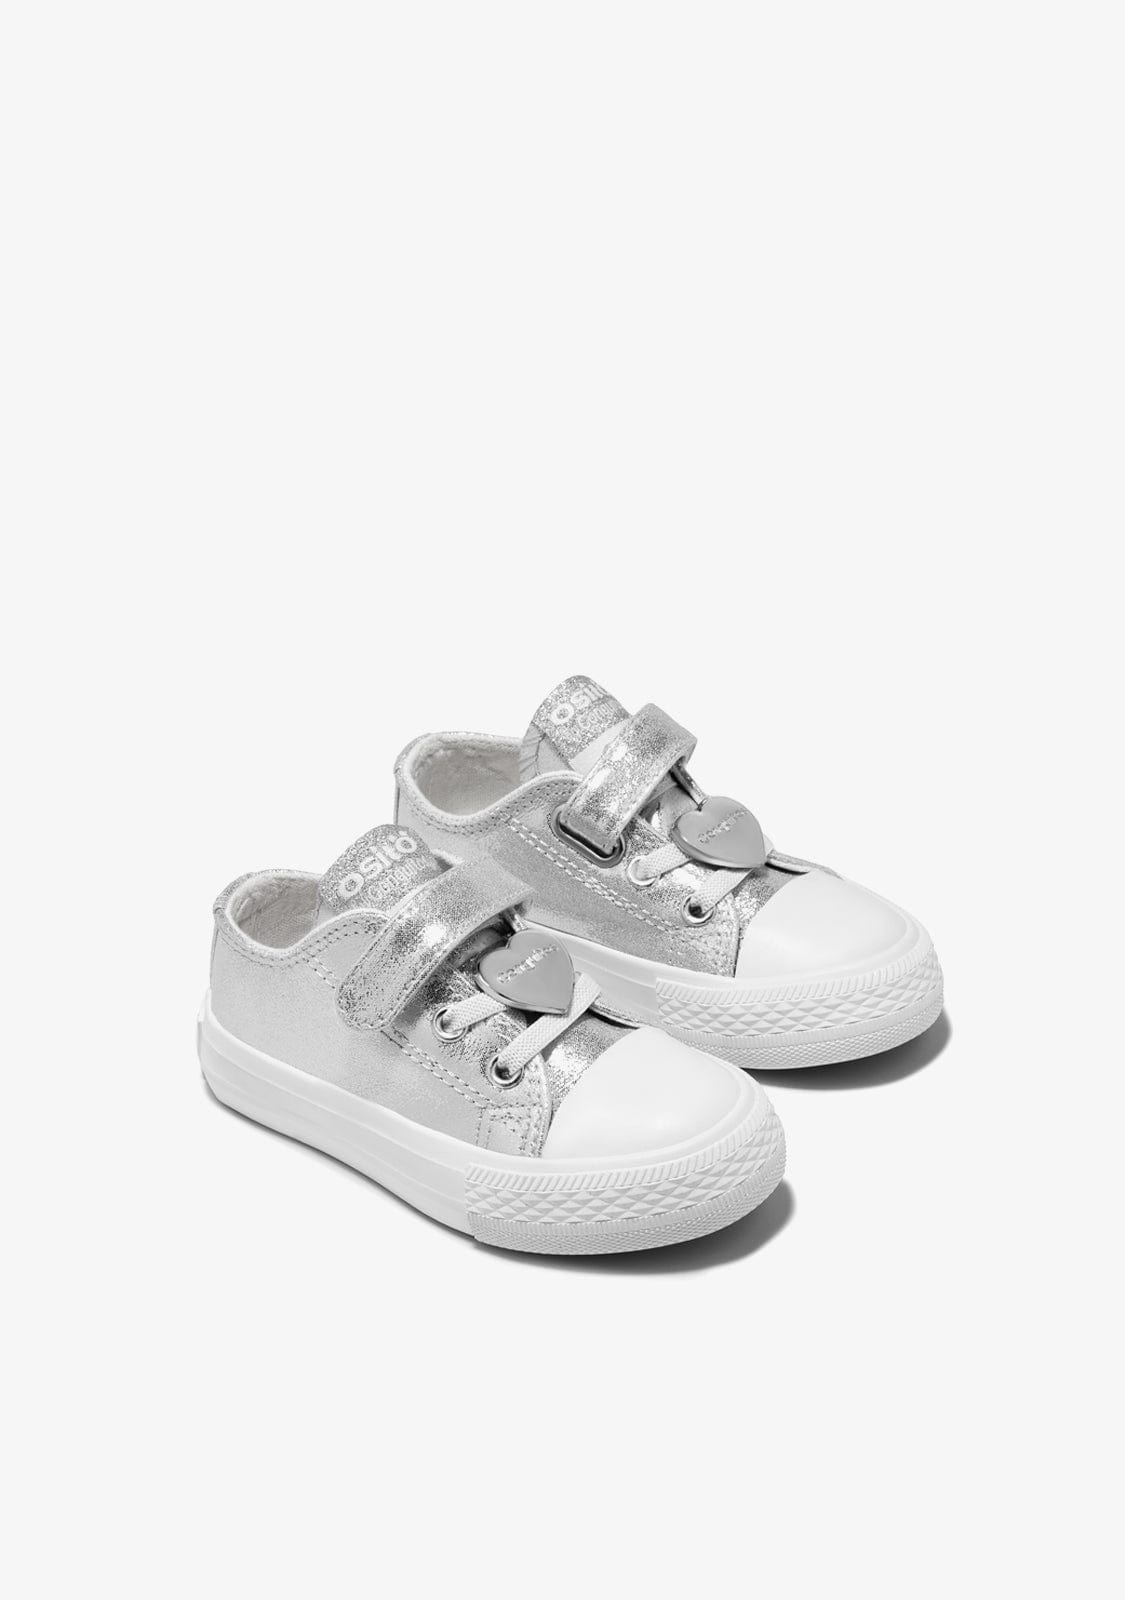 Conguitos BASKET Baby´s Metallized Silver Canvas Sneakers